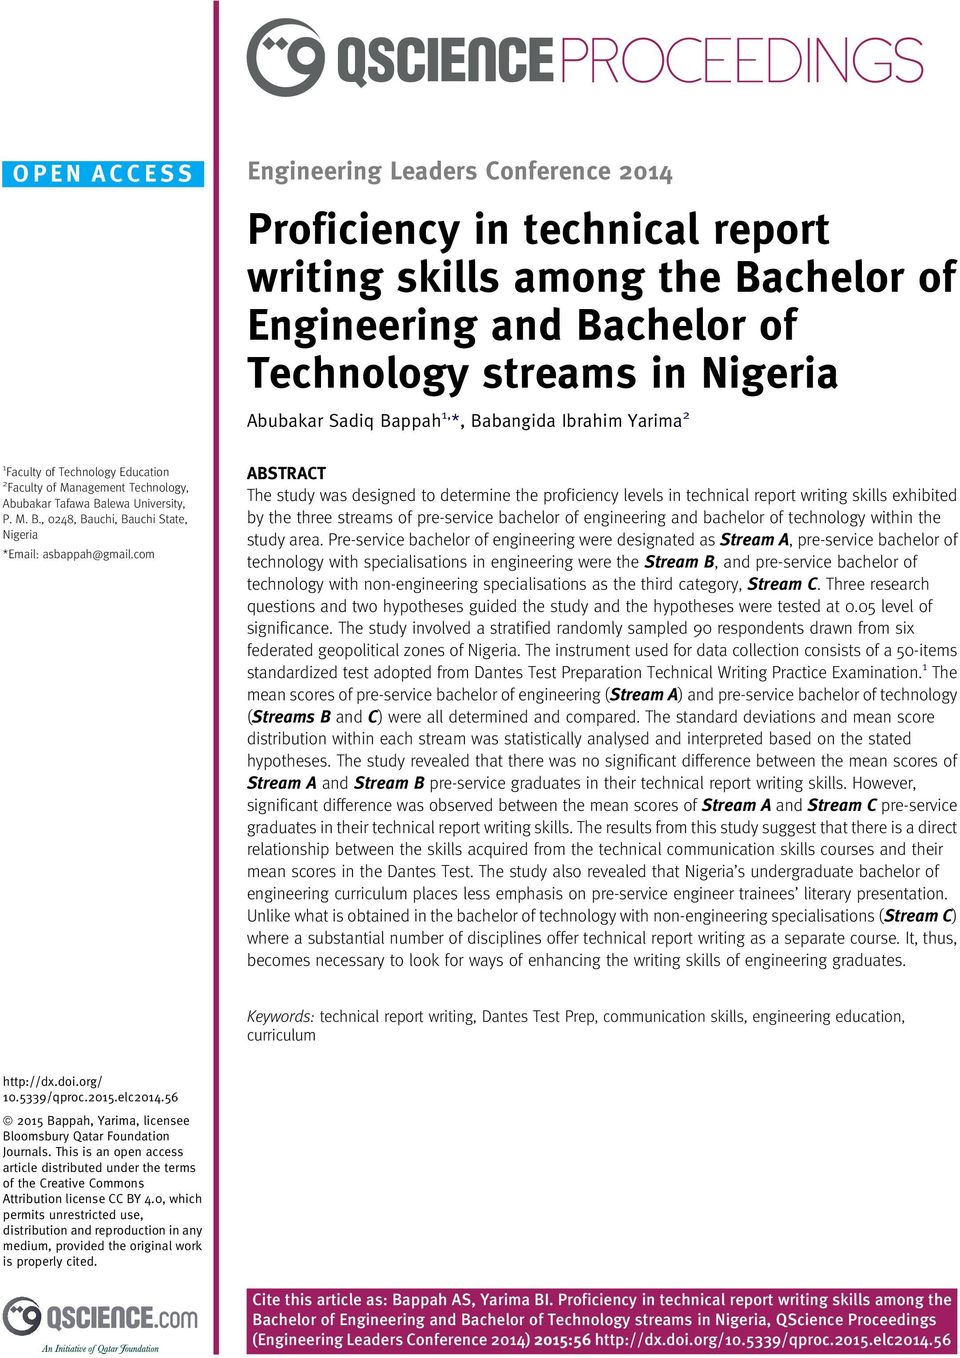 com ABSTRACT The study was designed to determine the proficiency levels in technical report writing skills exhibited by the three streams of pre-service bachelor of engineering and bachelor of